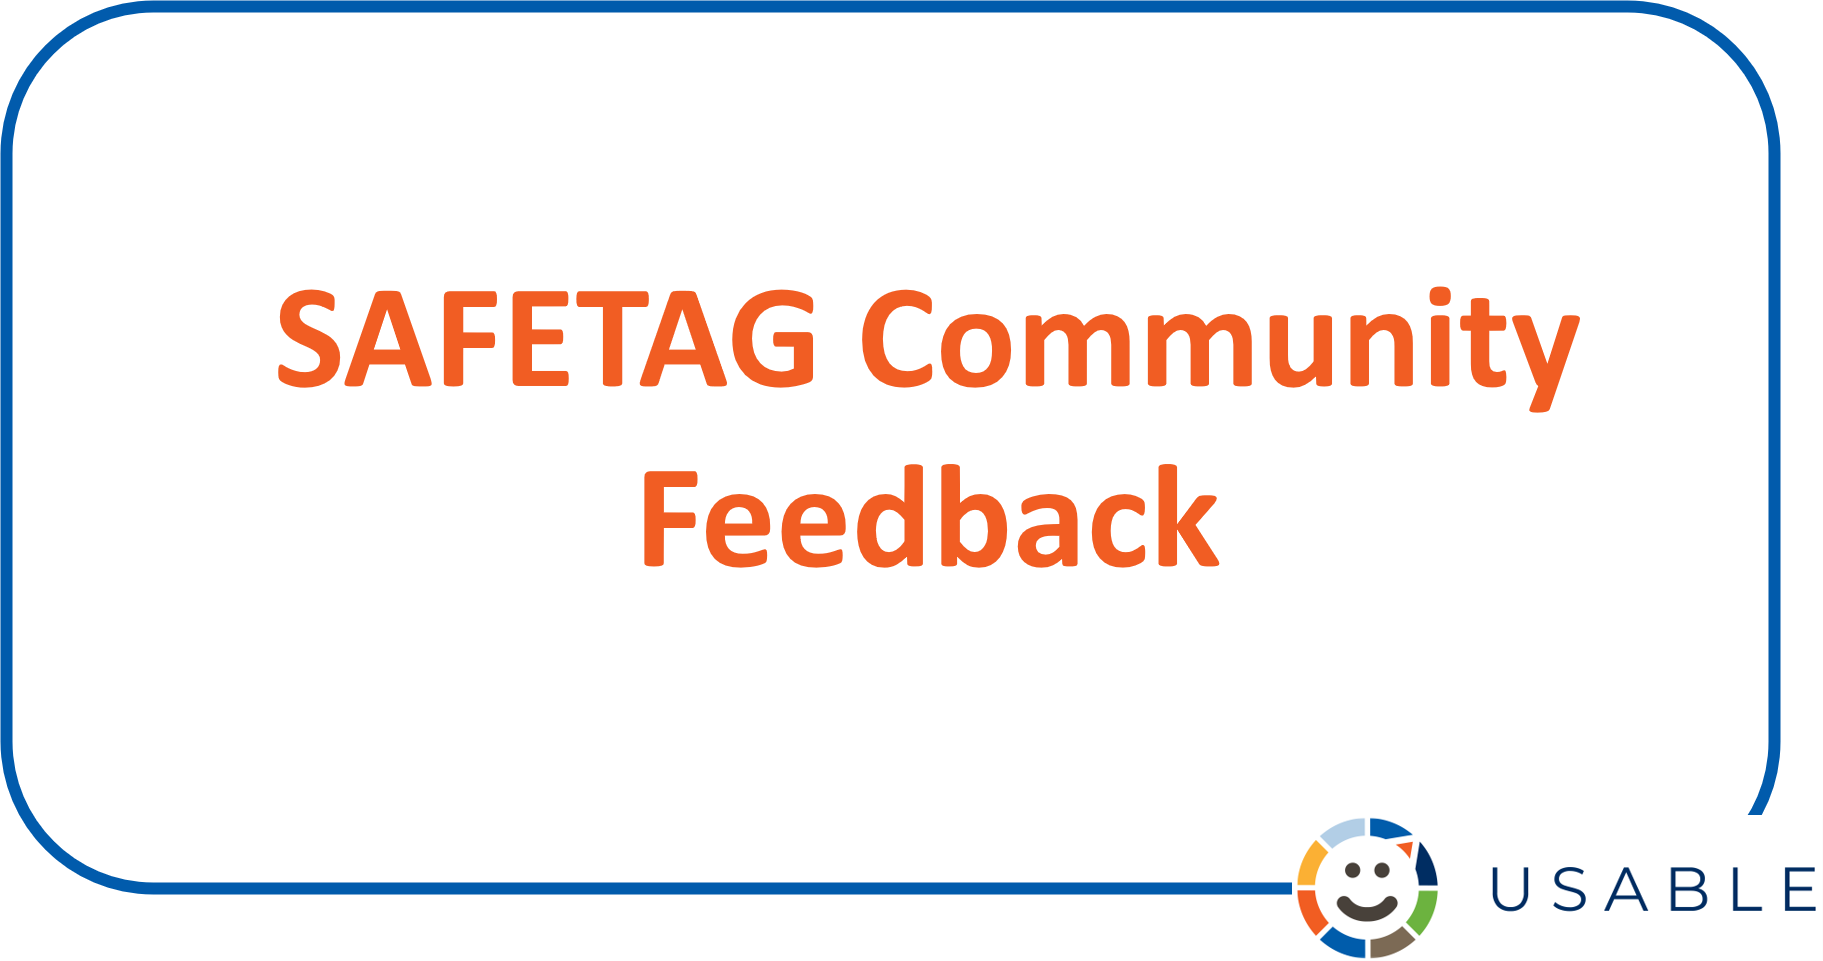 Image with title SAFETAG Community Feedback